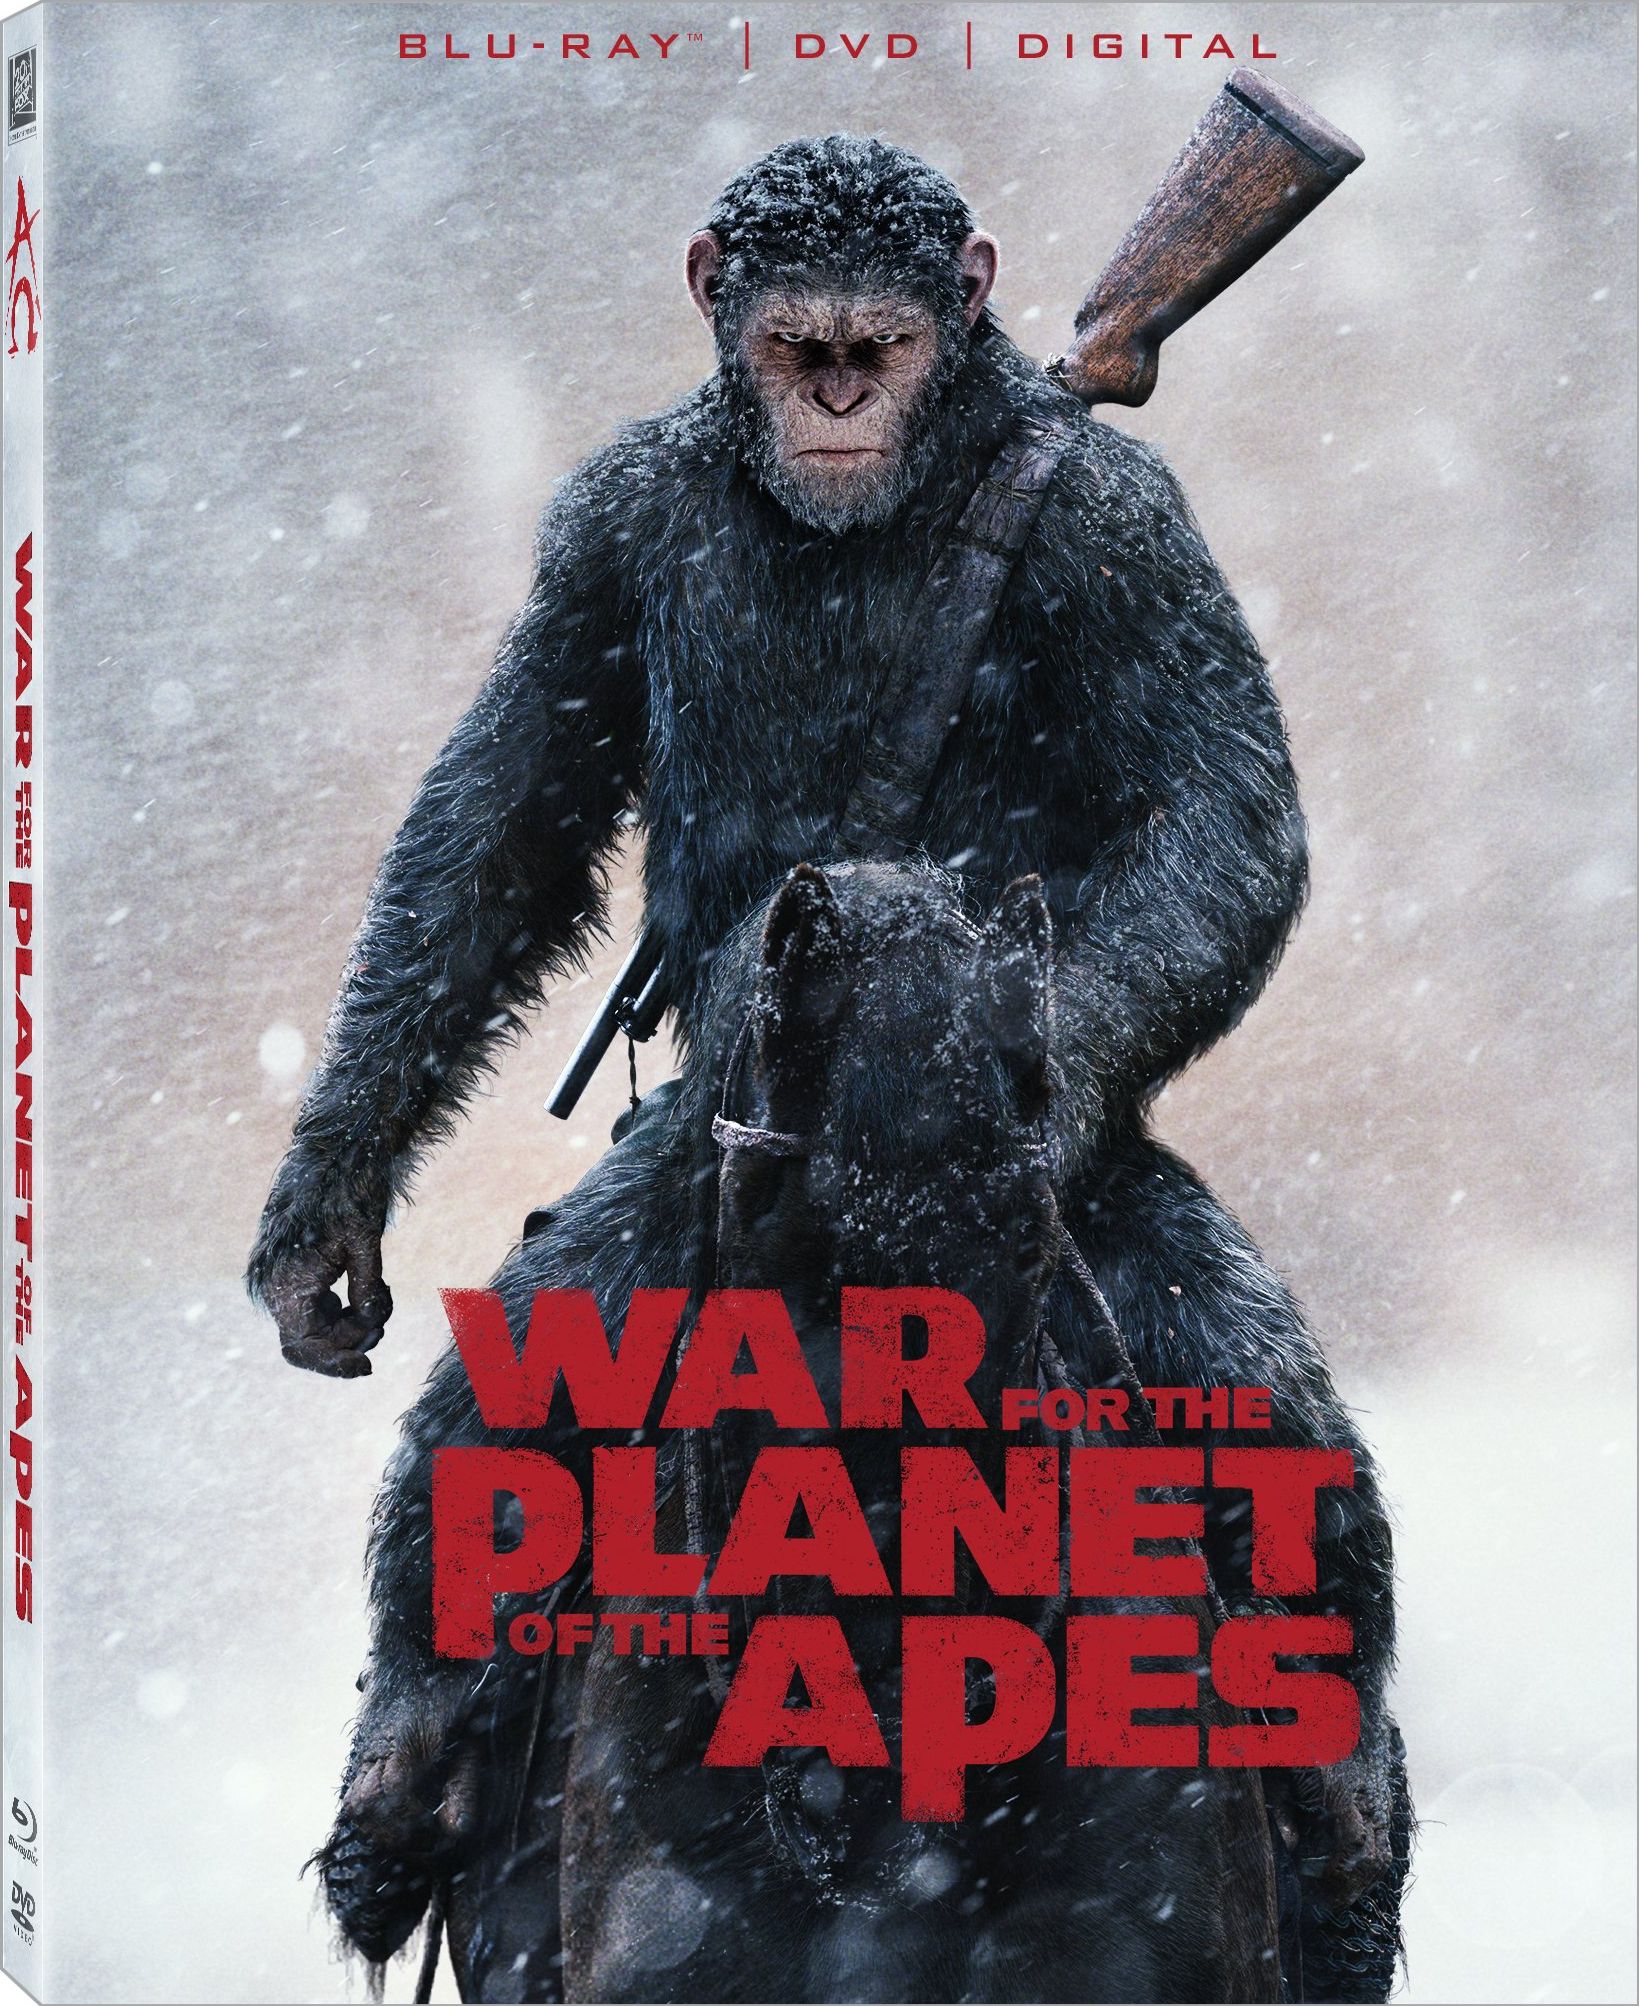 Watch War For The Planet Of The Apes War for the Planet of the Apes DVD Release Date October 24, 2017